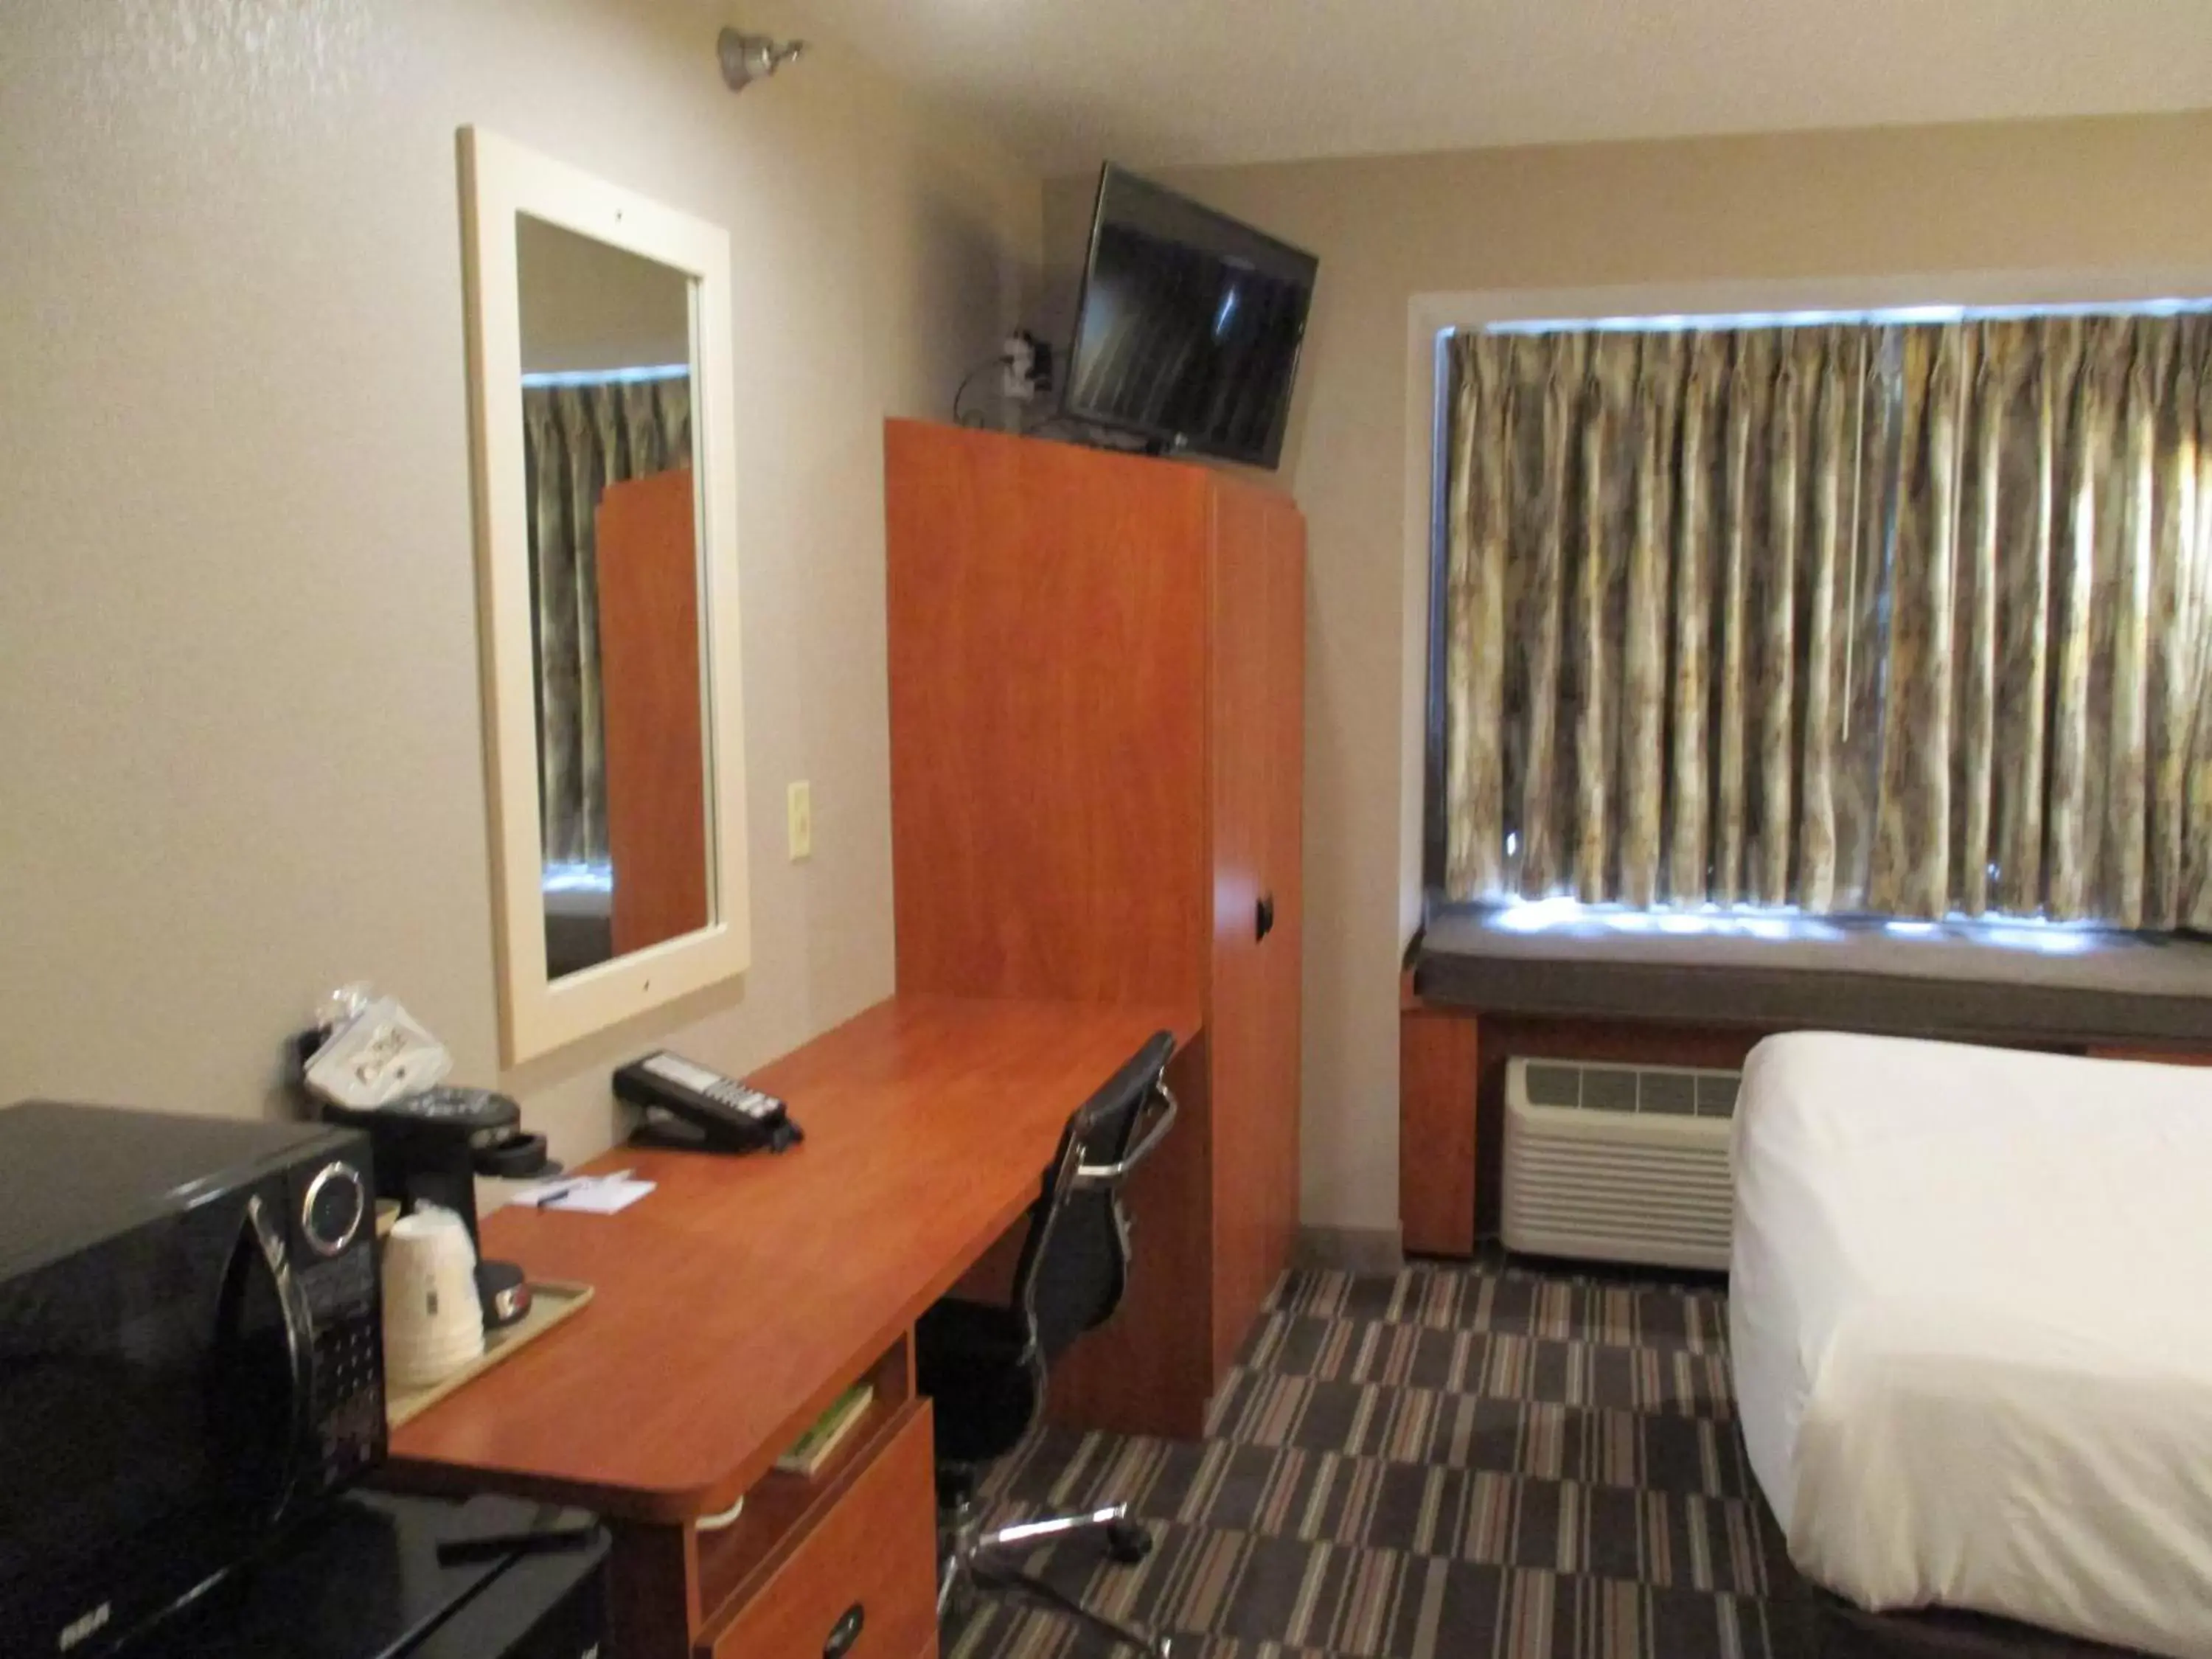 Bedroom, TV/Entertainment Center in Microtel Inn & Suites by Wyndham New Ulm